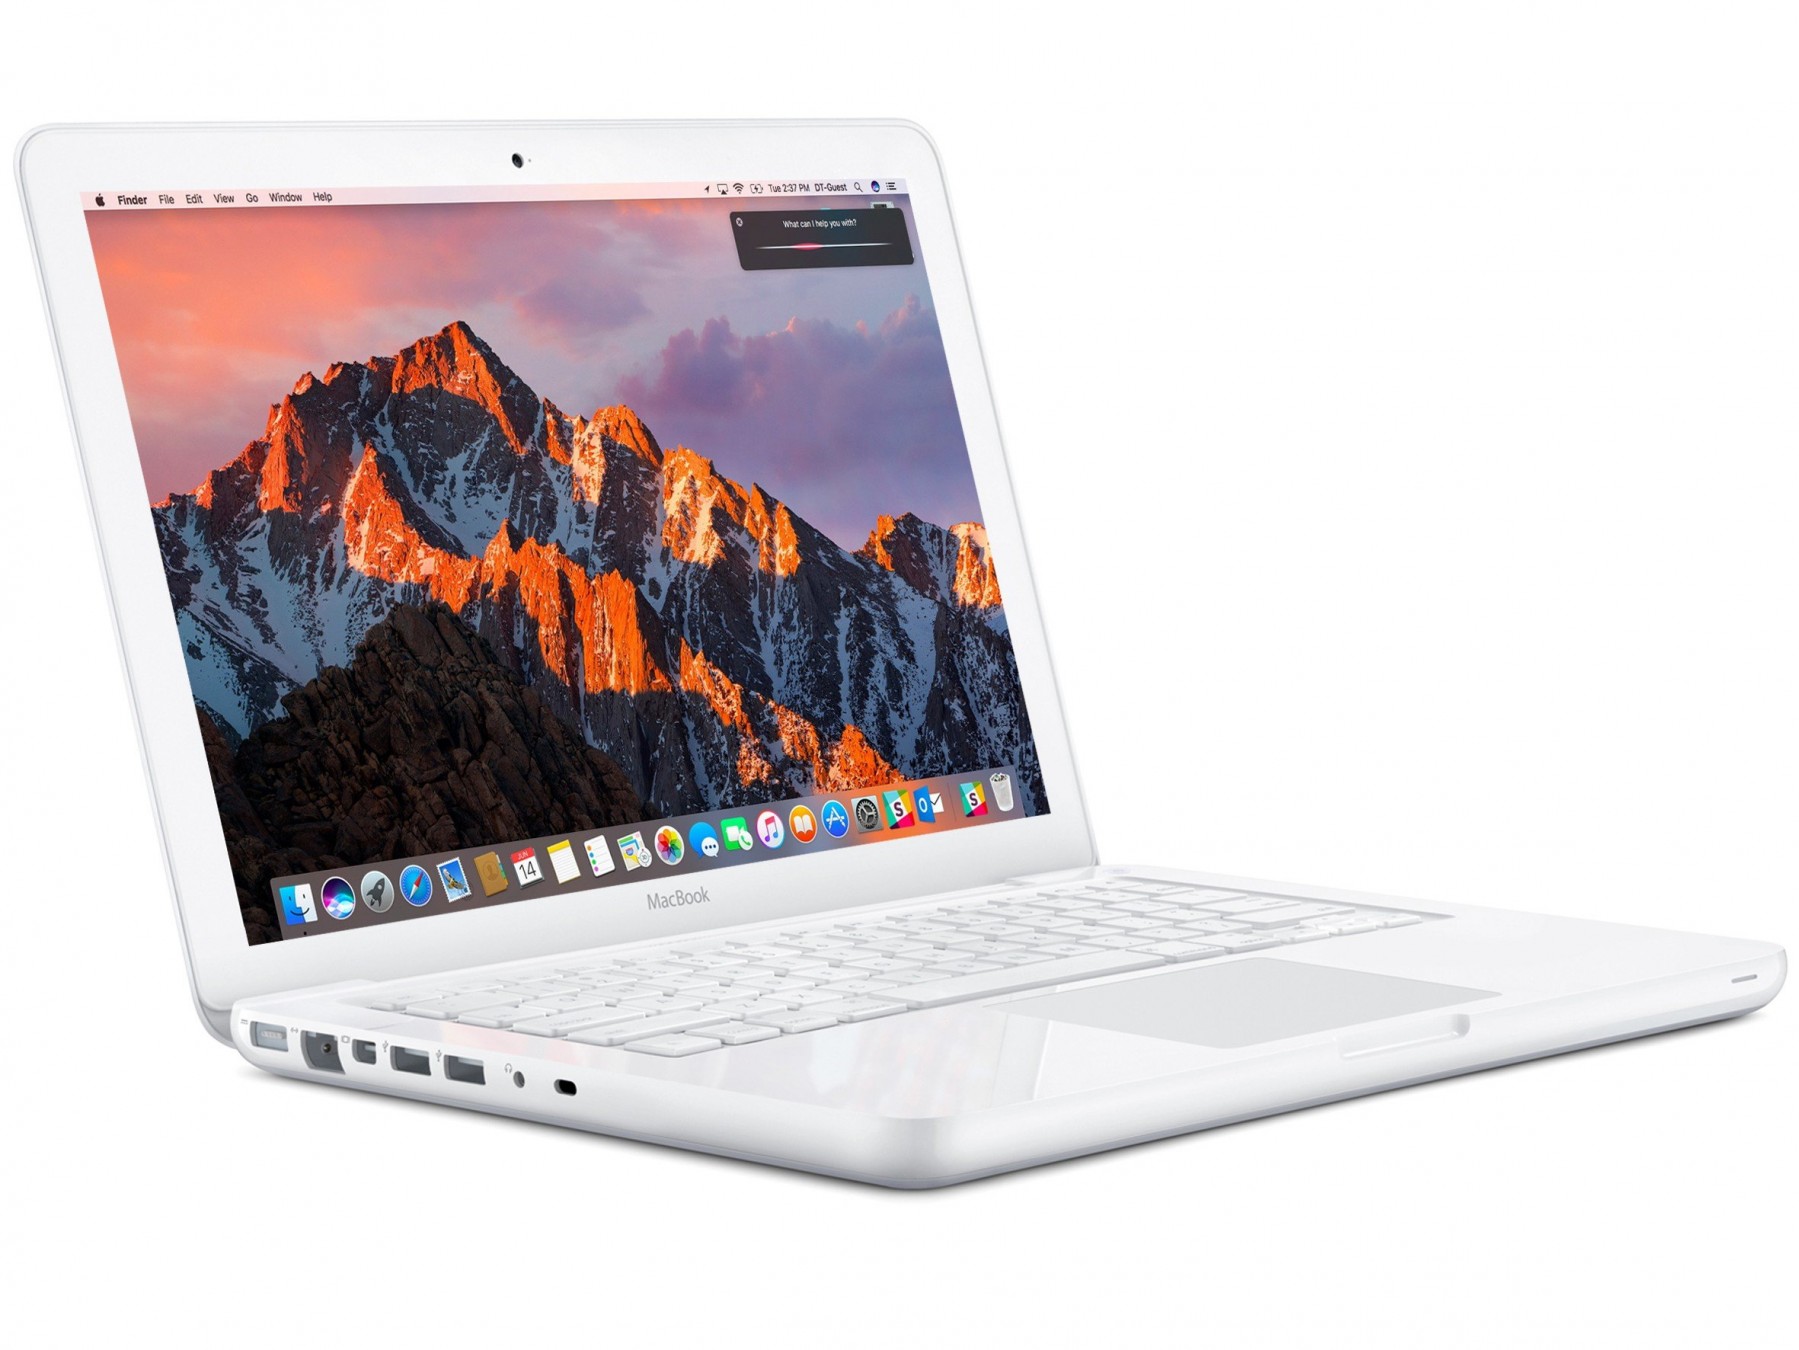 APL-MBK-A1342-CR2-Apple MacBook A1342 Refurbished 4 GB RAM 250 GB HDD C2D 13.3-inch 2010 Fully Activated OSX 10.7 -image